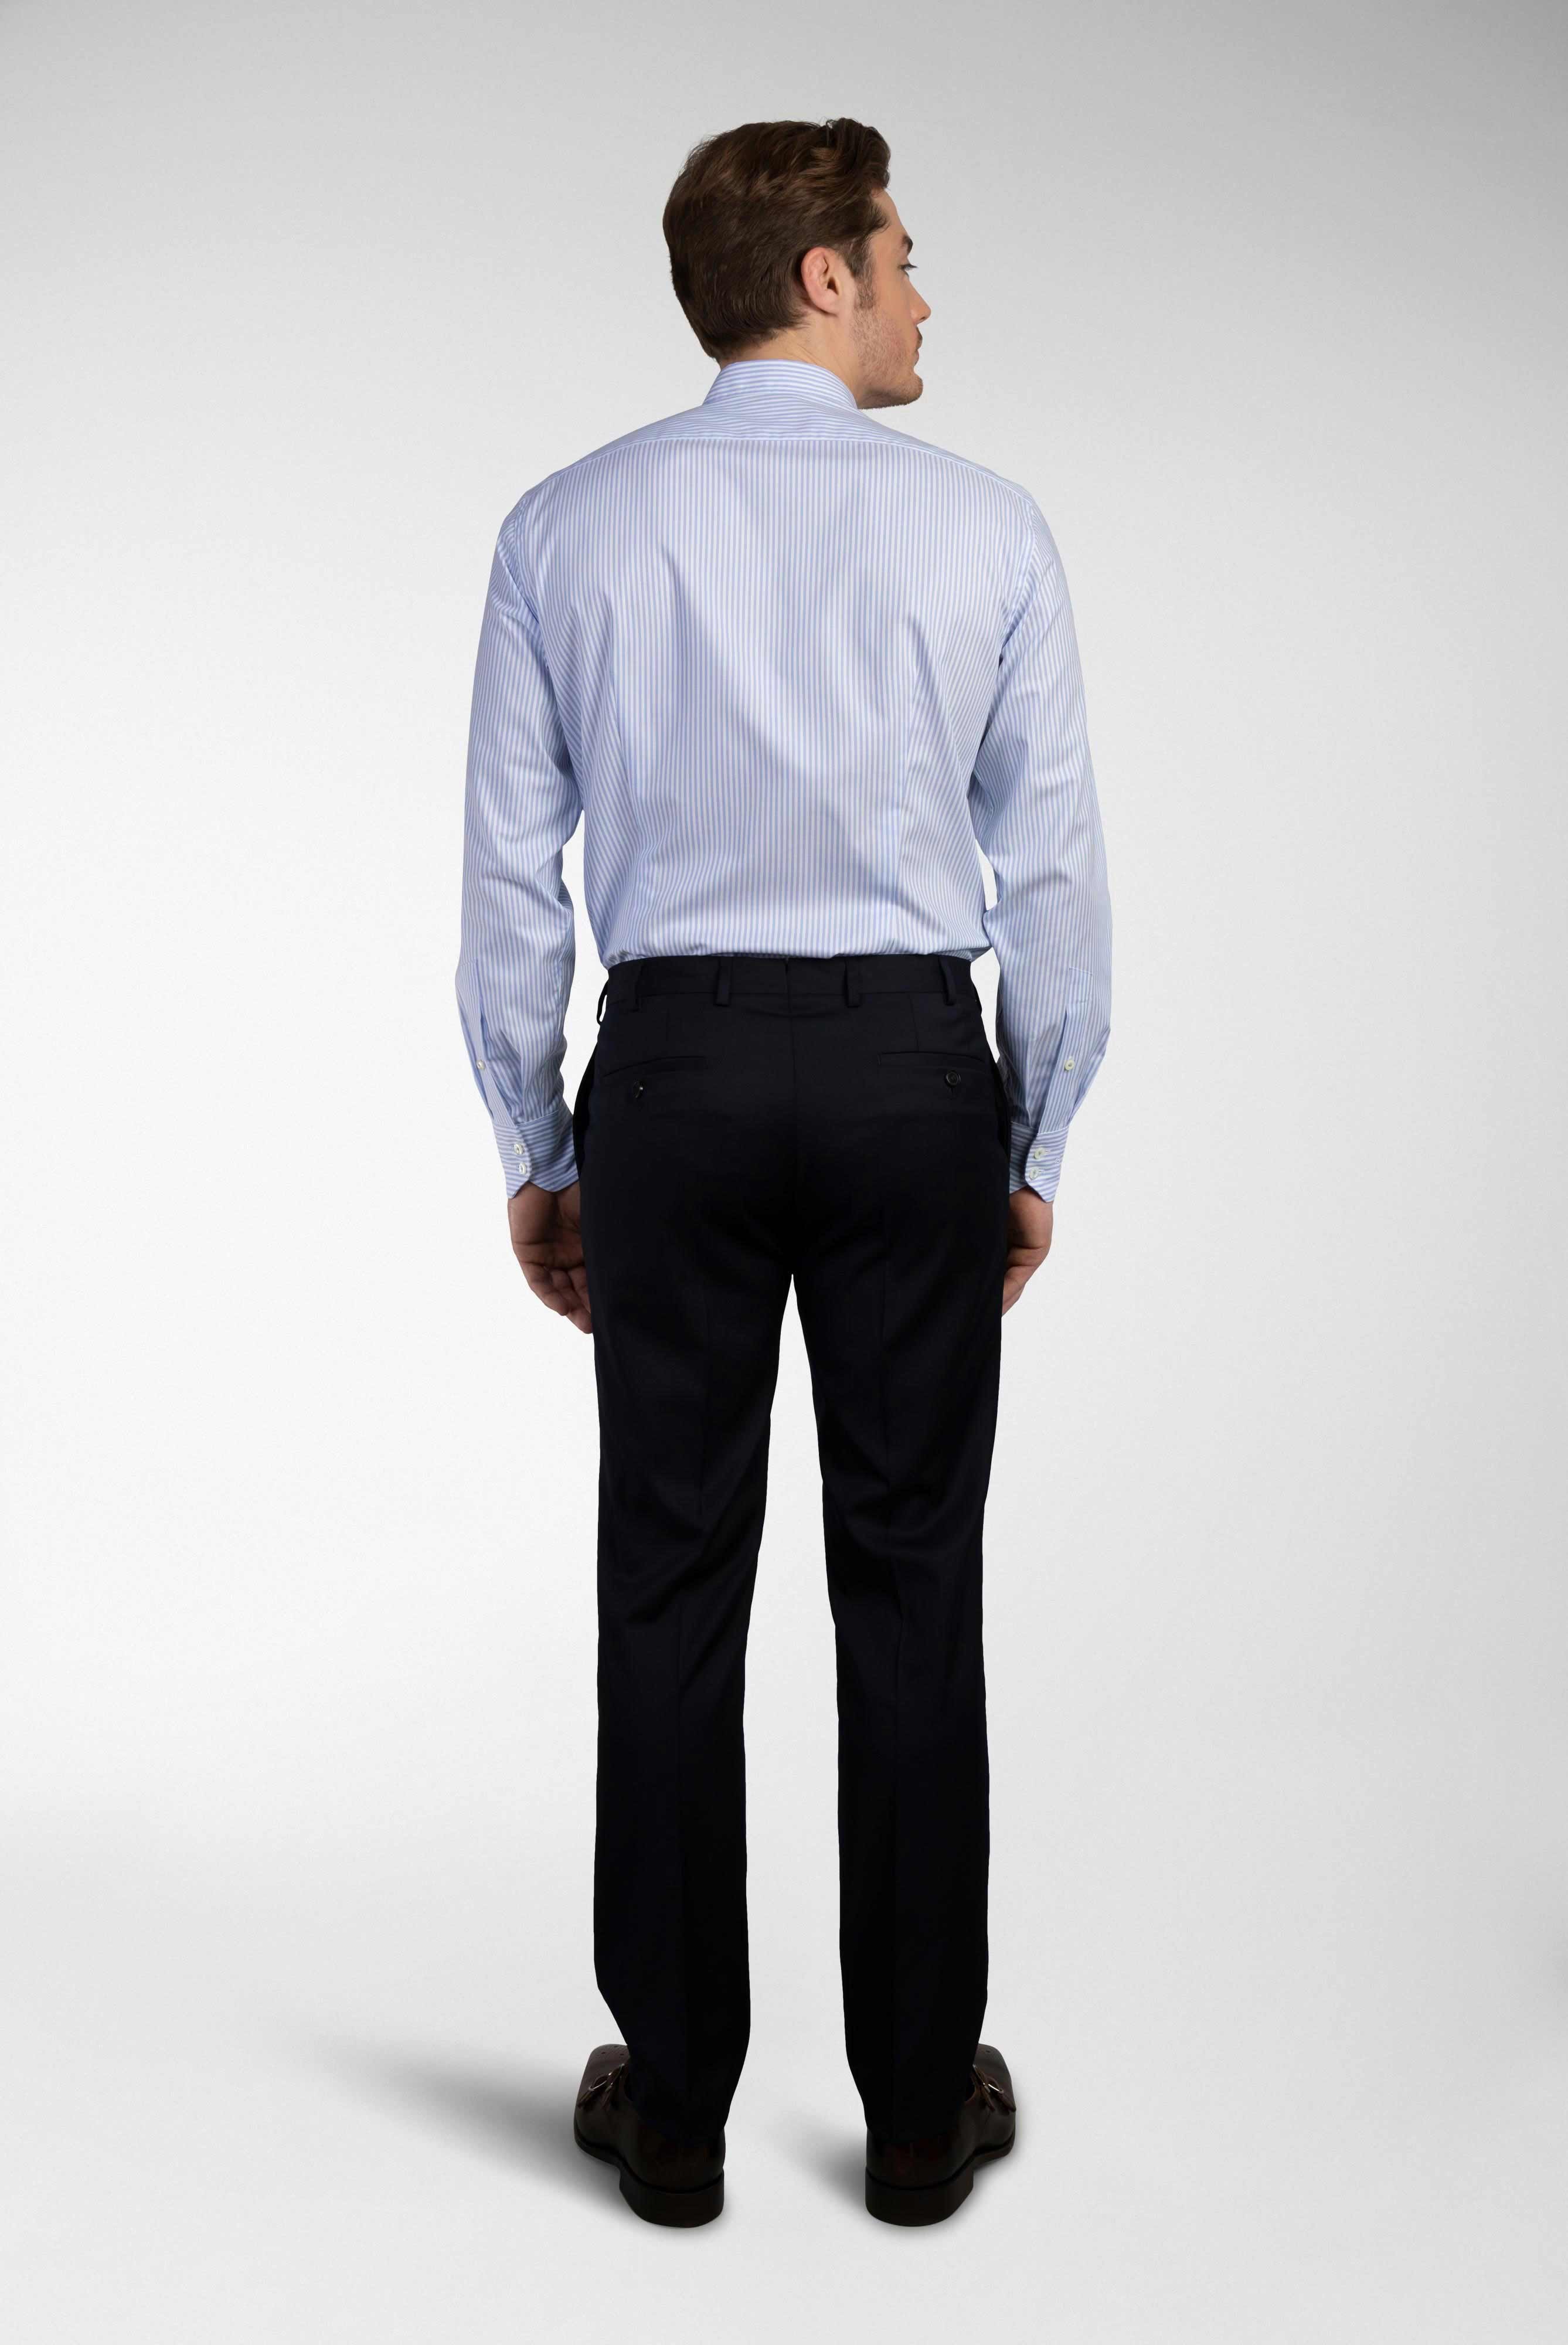 Business Shirts+Wrinkle-Free Shirt with Stripes Tailor Fit+20.3281.NV.166020.730.37